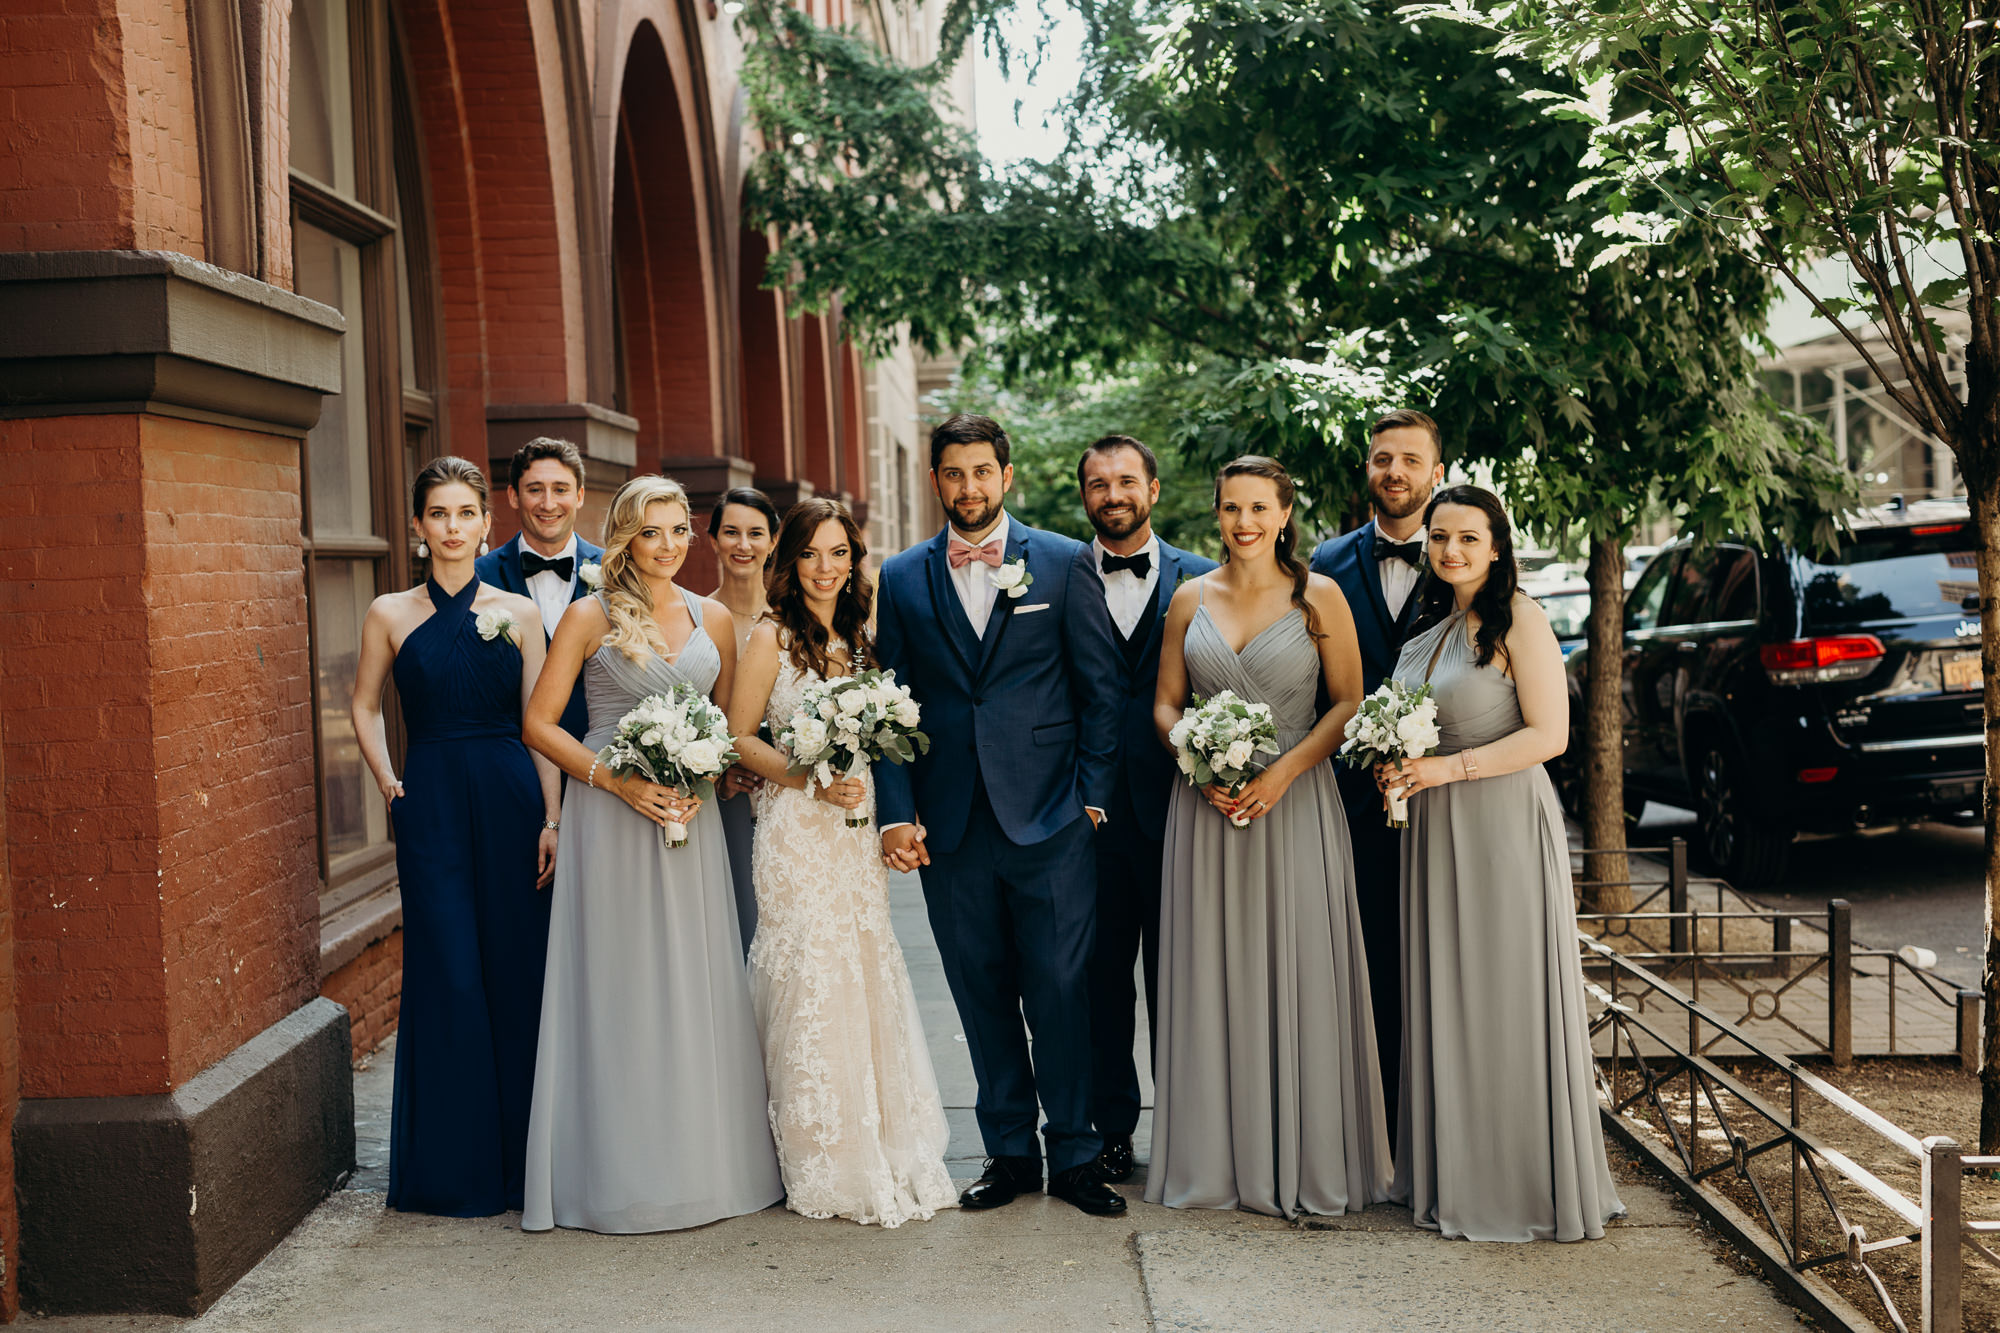 a portrait of a bride and groom with their wedding party at city winery in new york city, new york